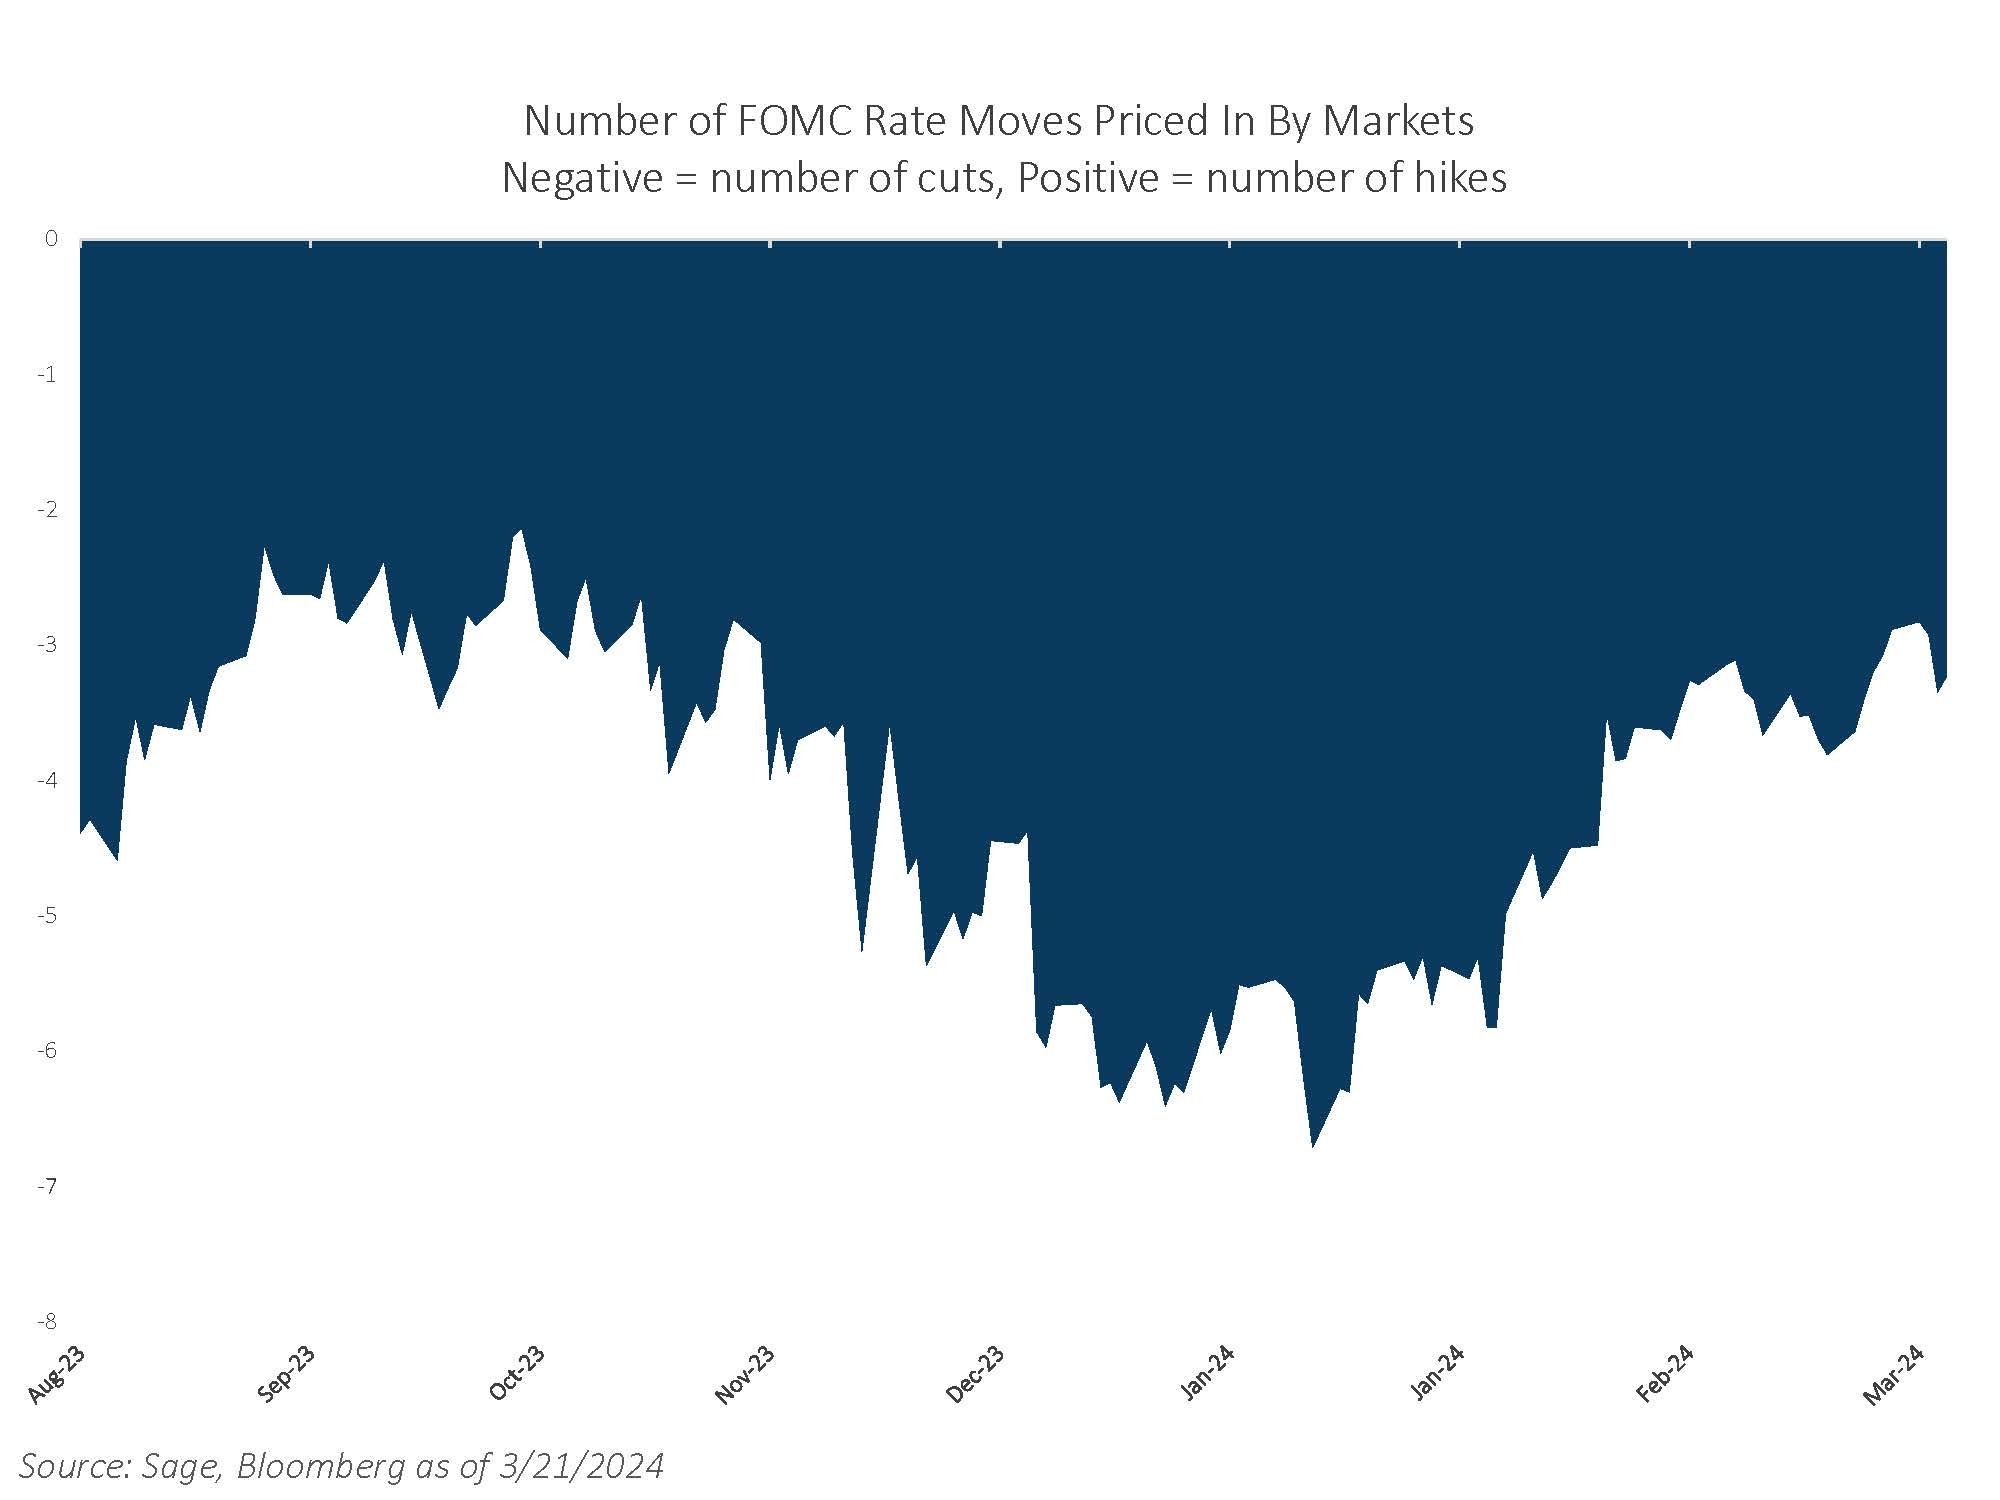 Number of FOMC Rate Moves Priced in by Markets